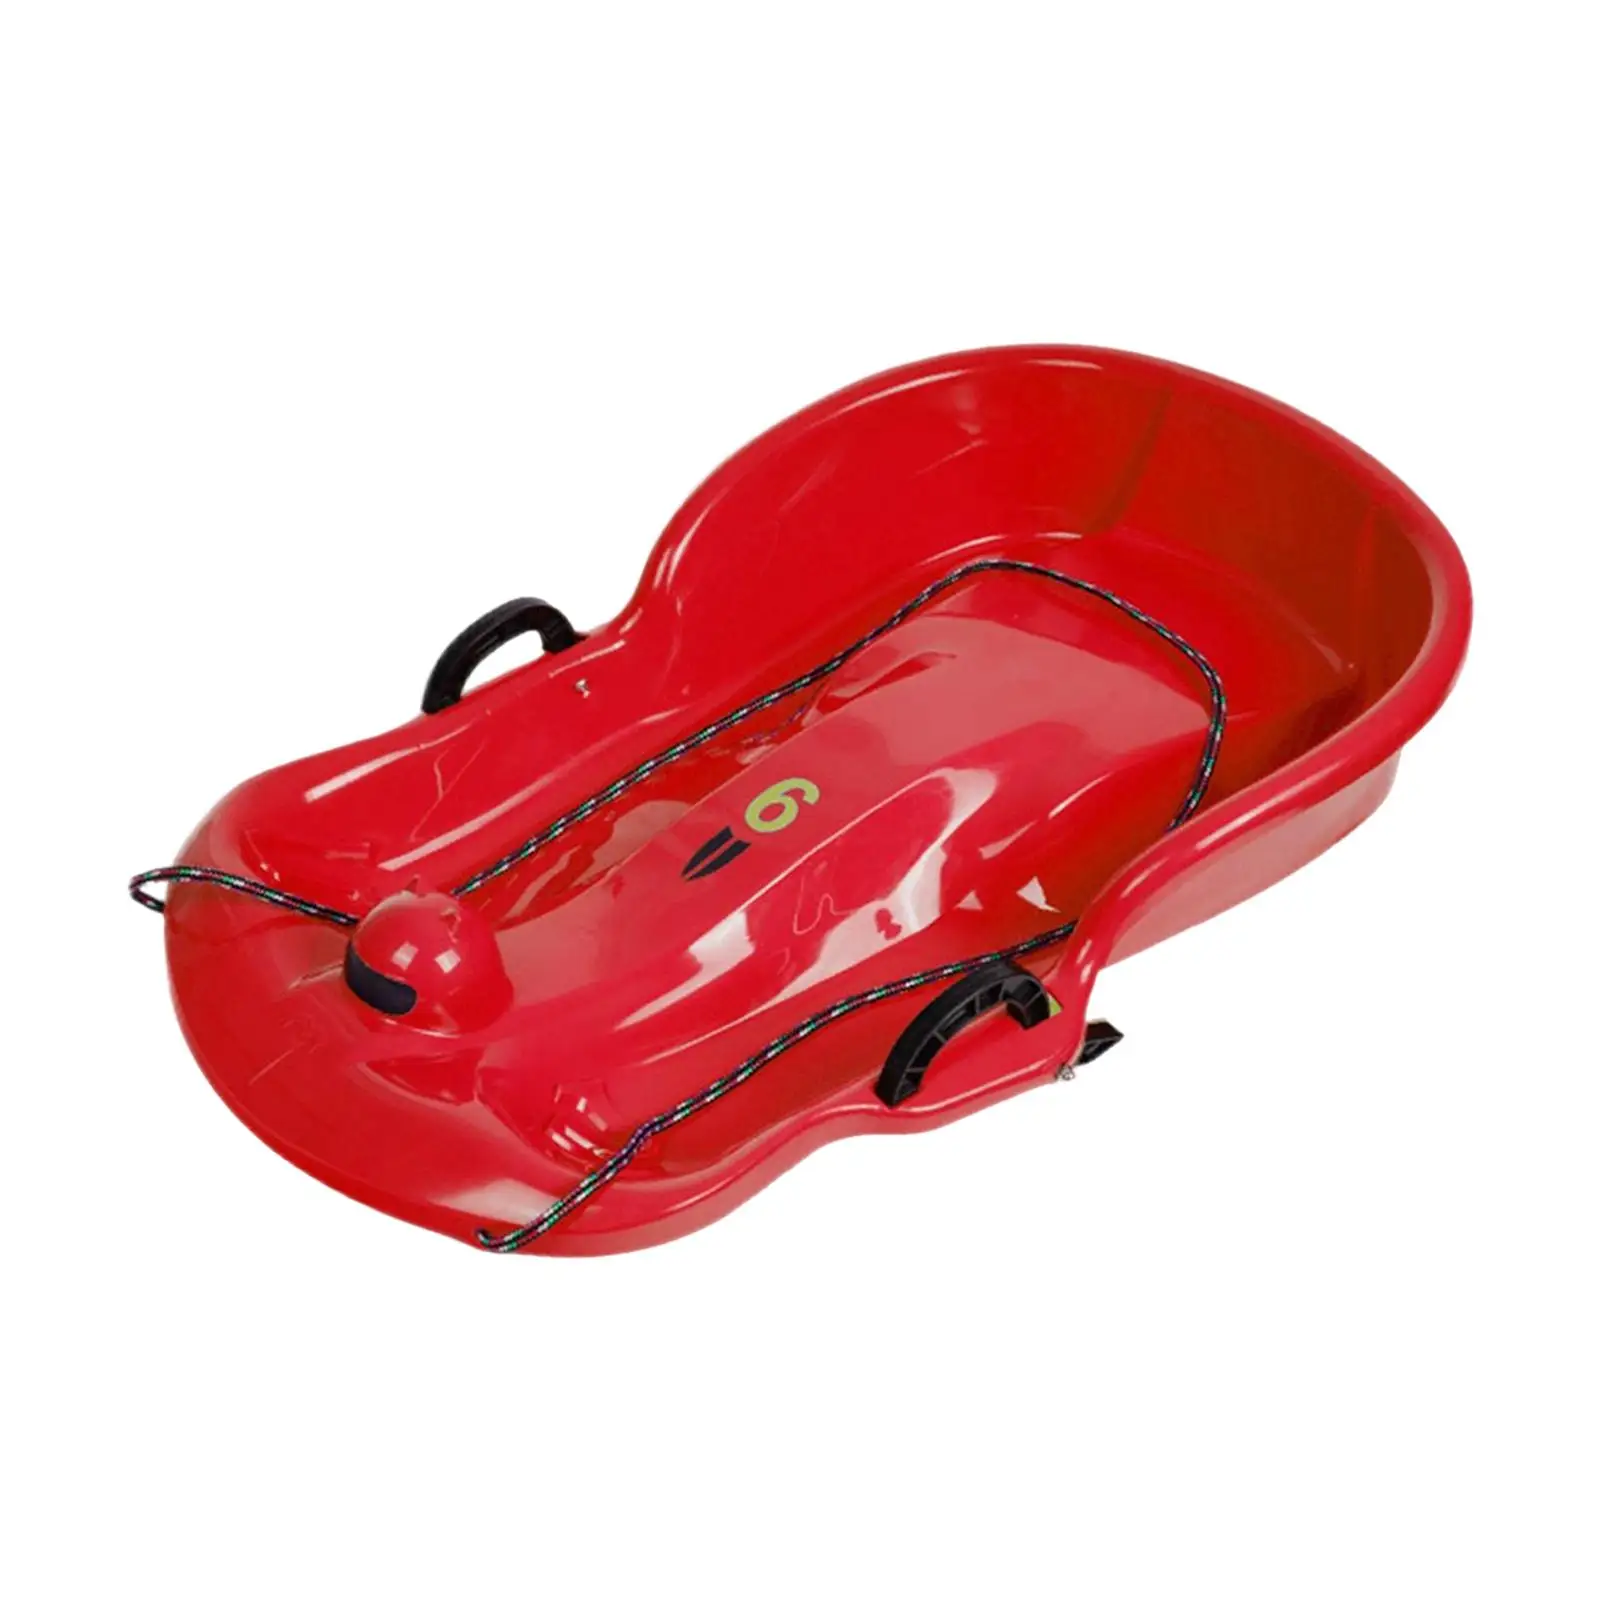 Winter snow sled with brake handle, kids sled with double seat for sports,